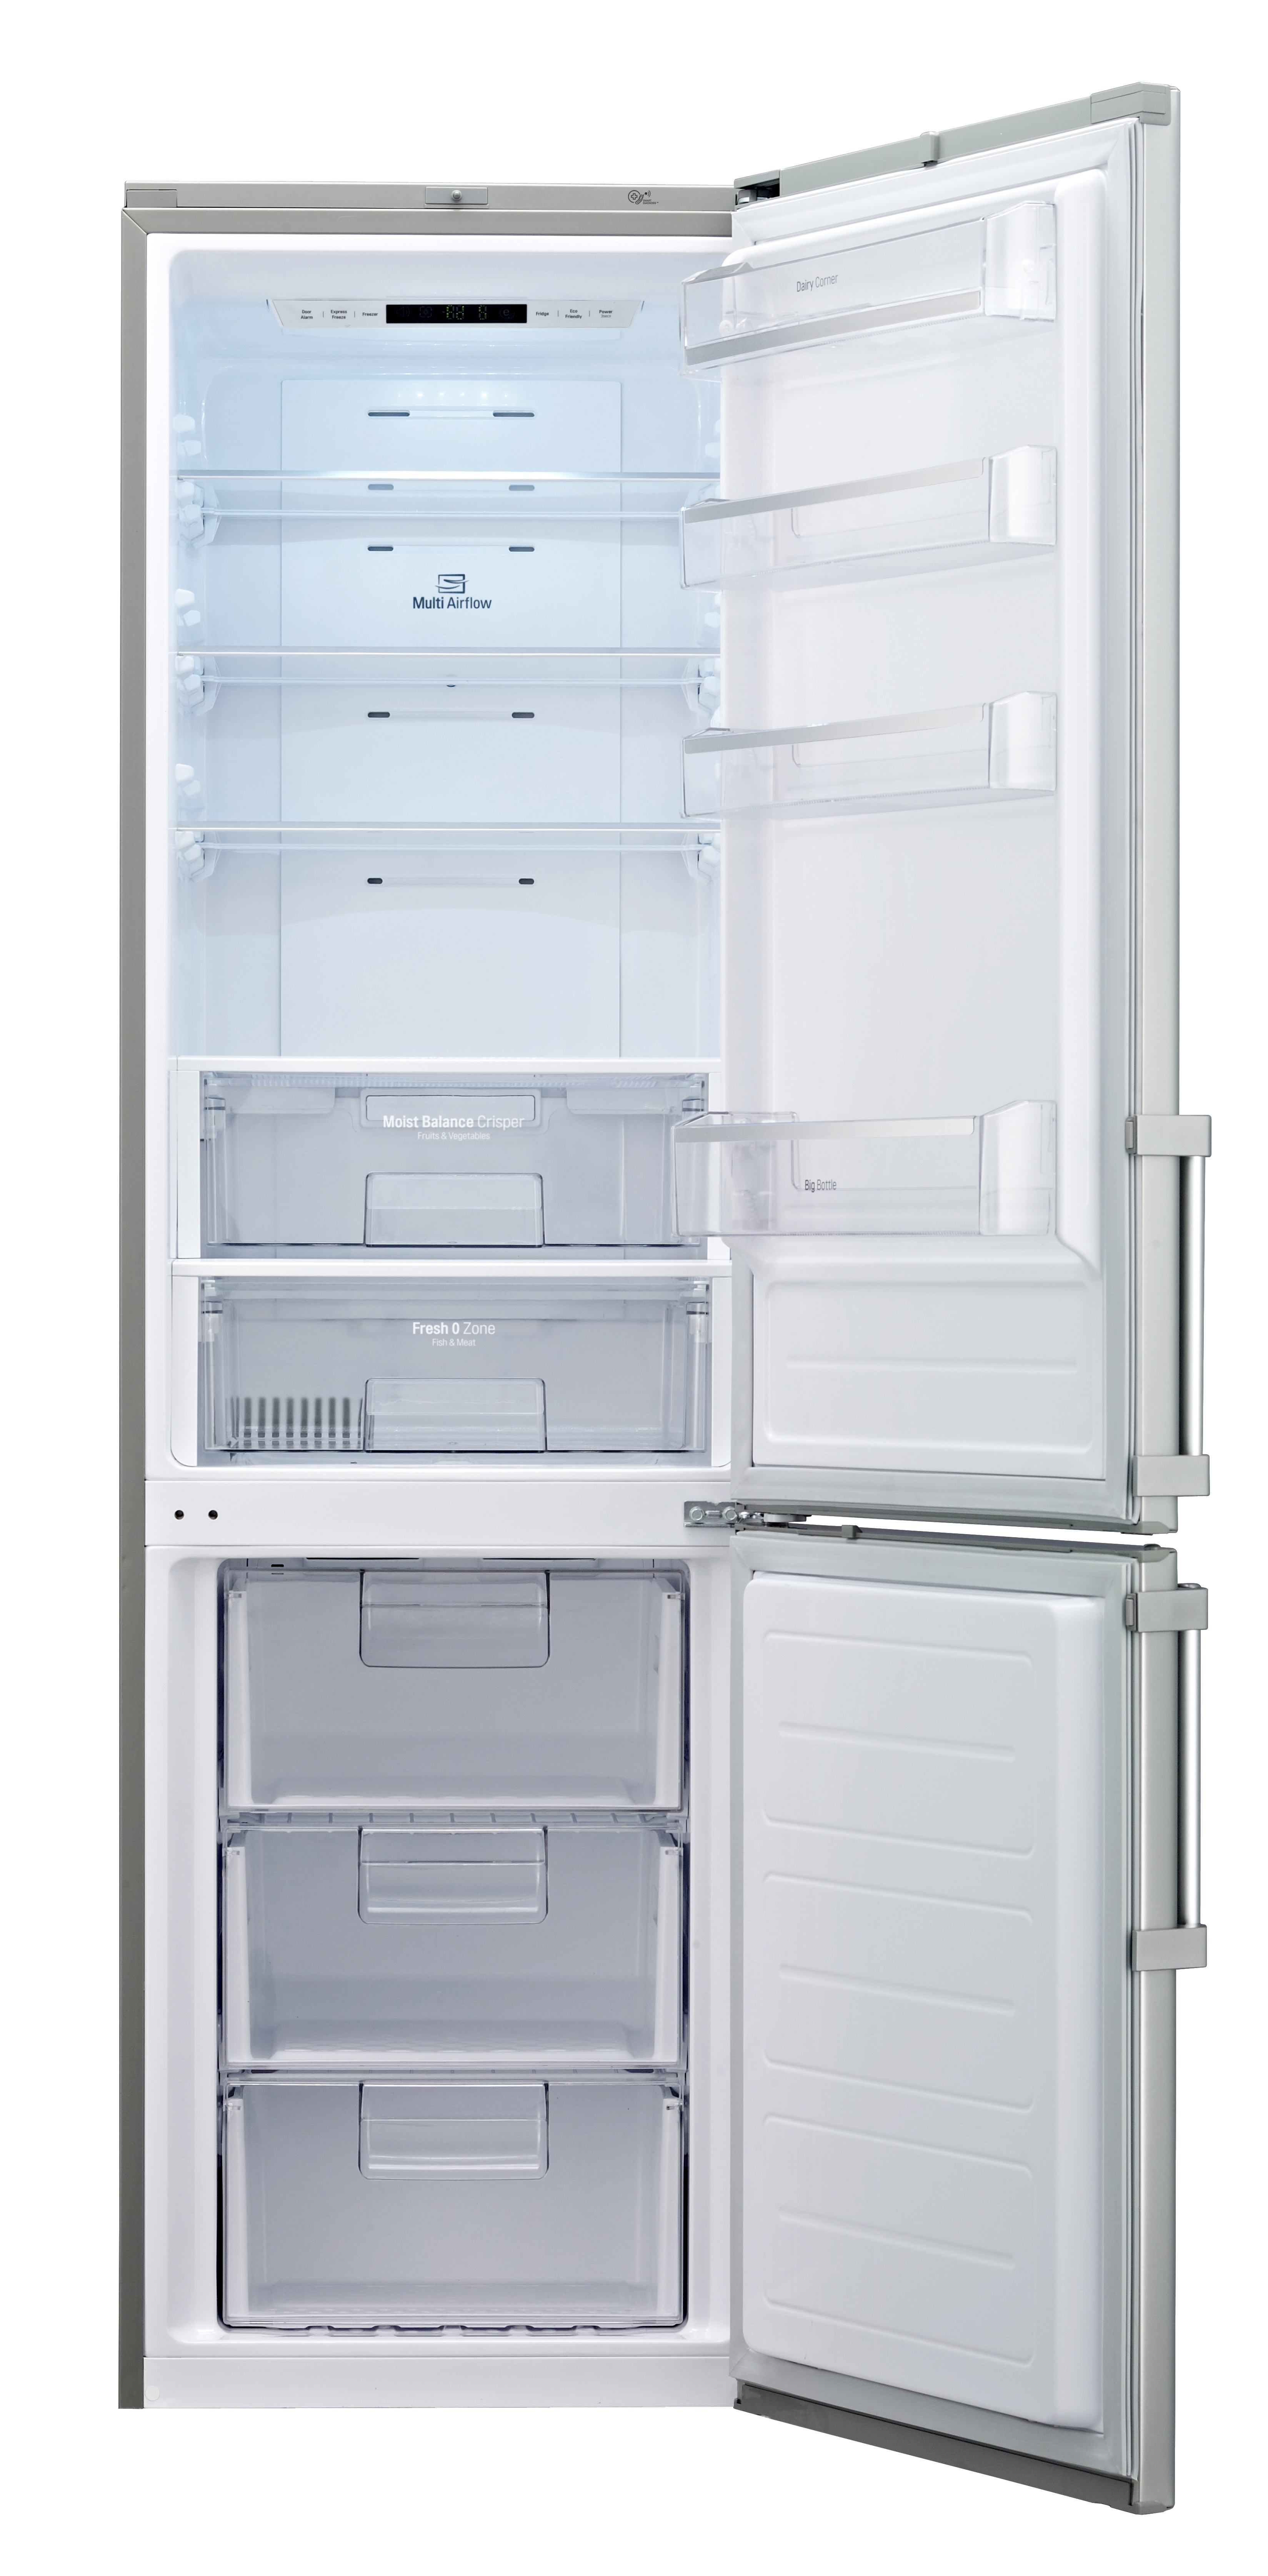 LG REFRIGERATOR WITH INVERTER LINEAR COMPRESSOR EARNS INDUSTRY